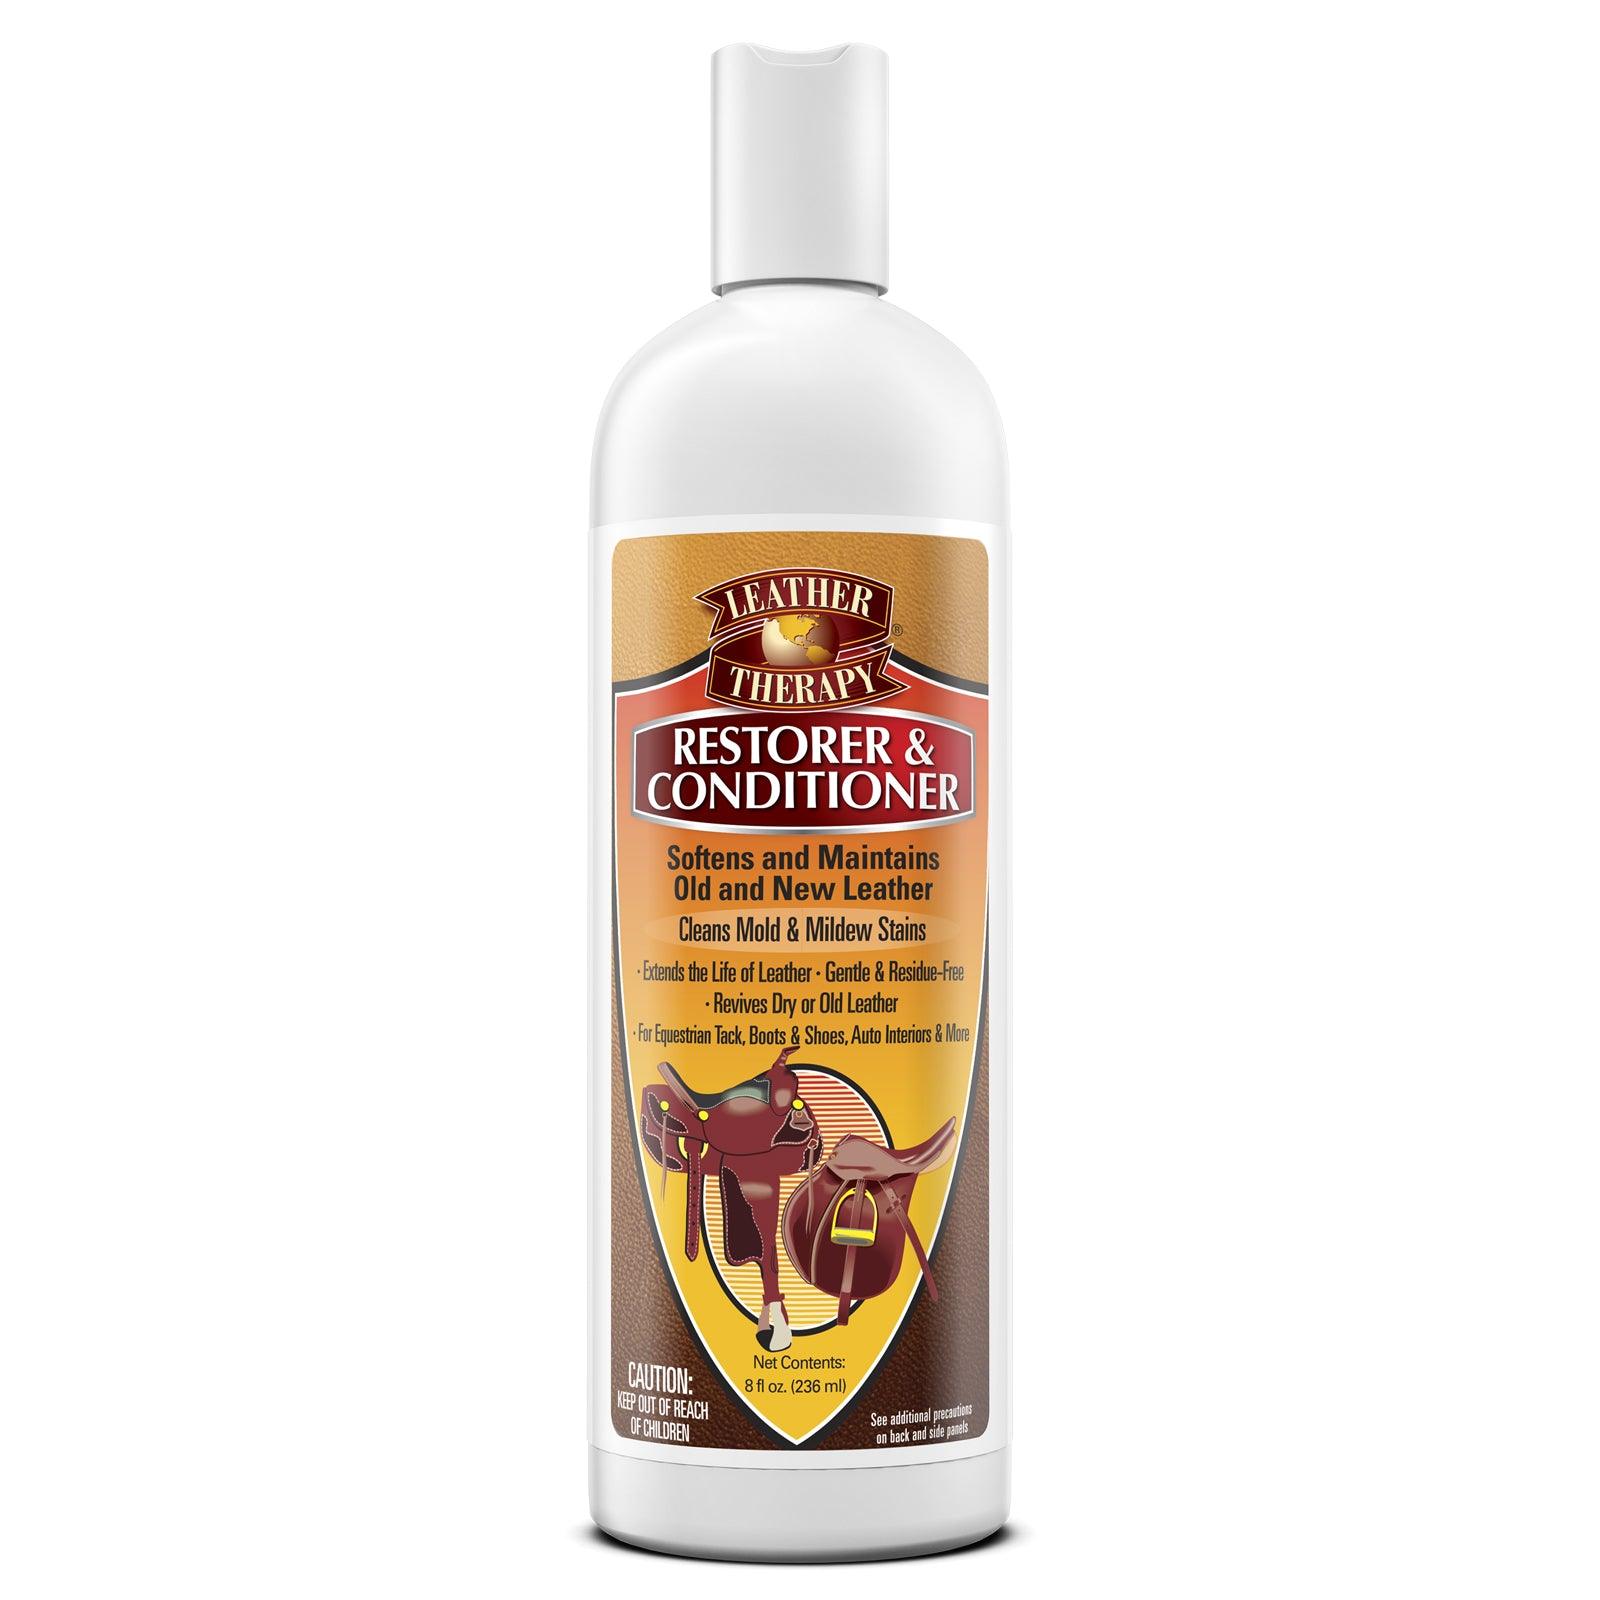 Leather Therapy® Restorer & Conditioner Leather Care absorbine 8 oz.  